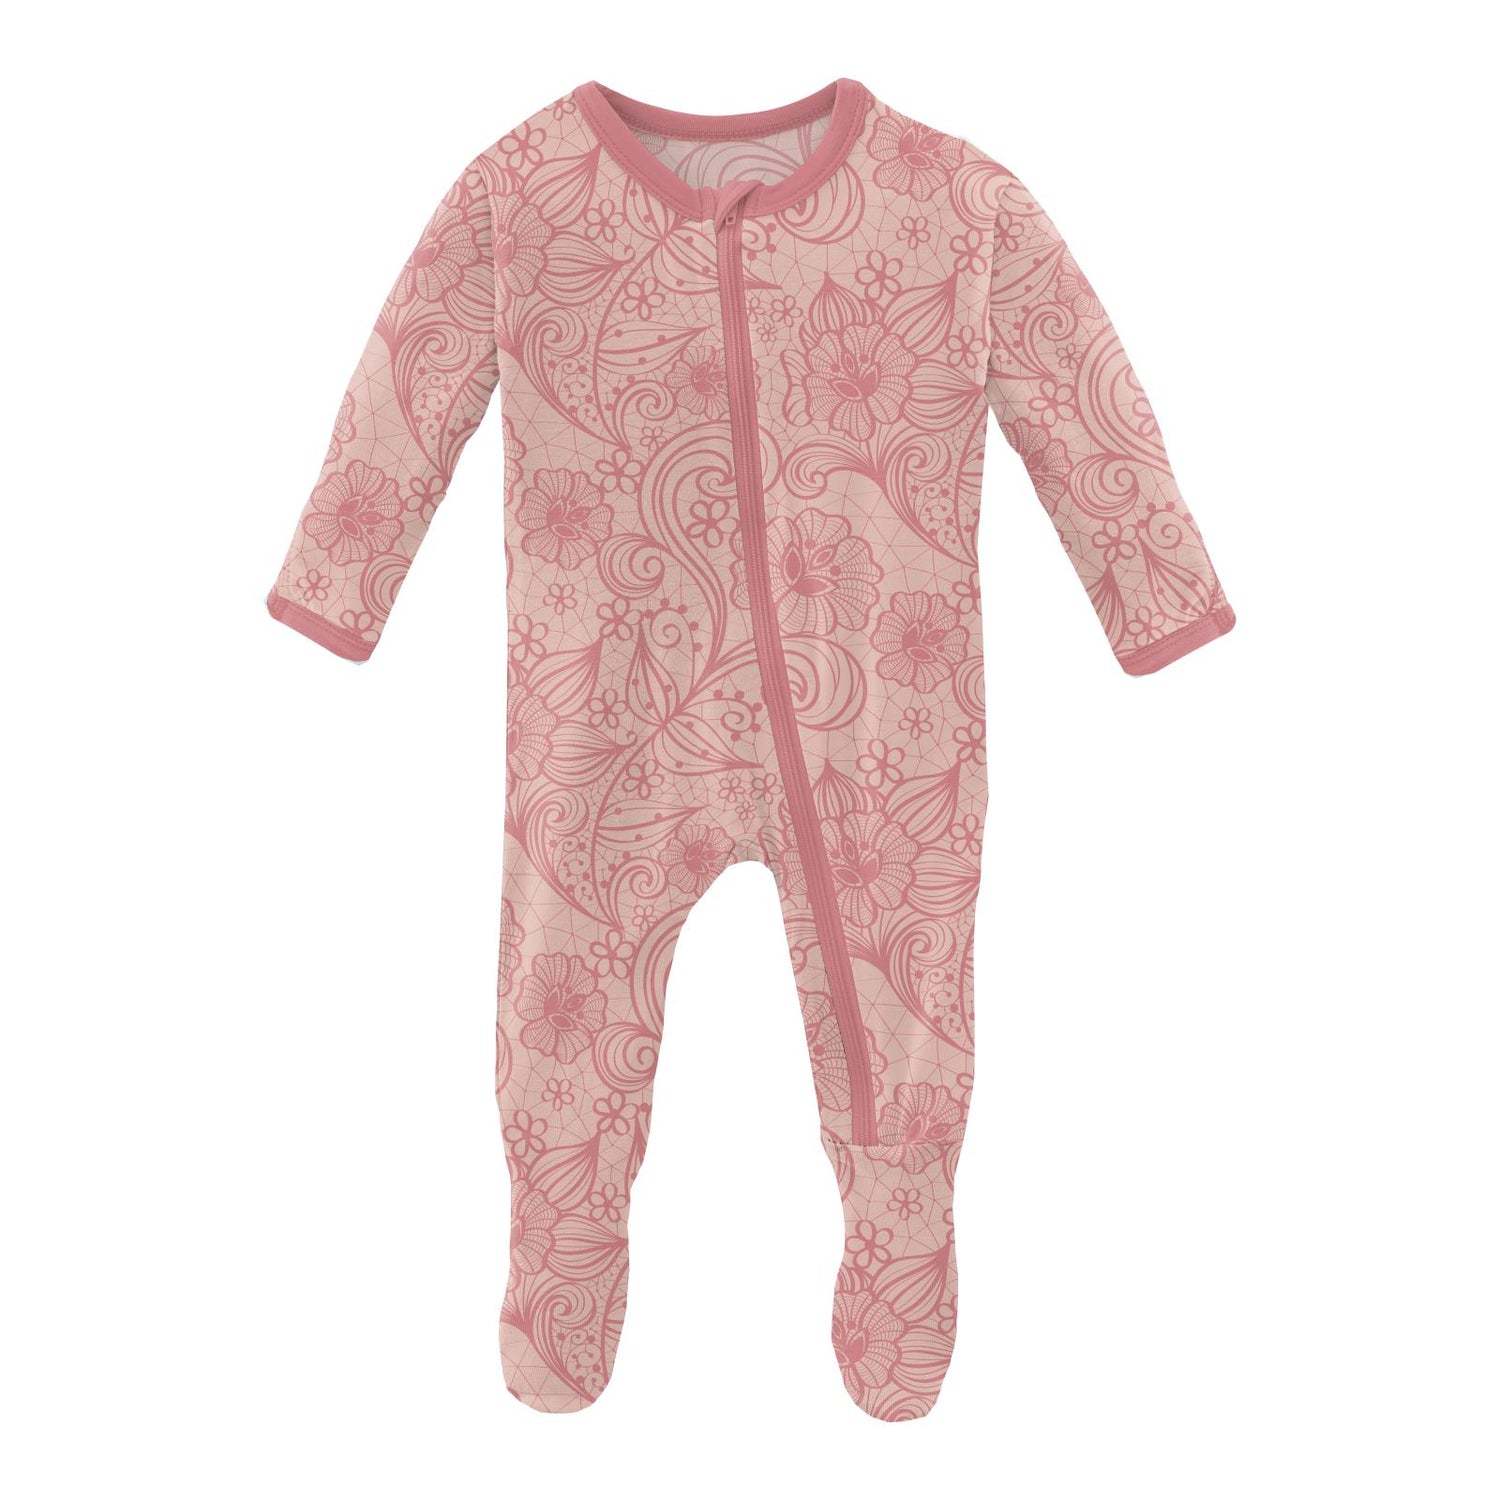 Print Footie with Zipper in Peach Blossom Lace